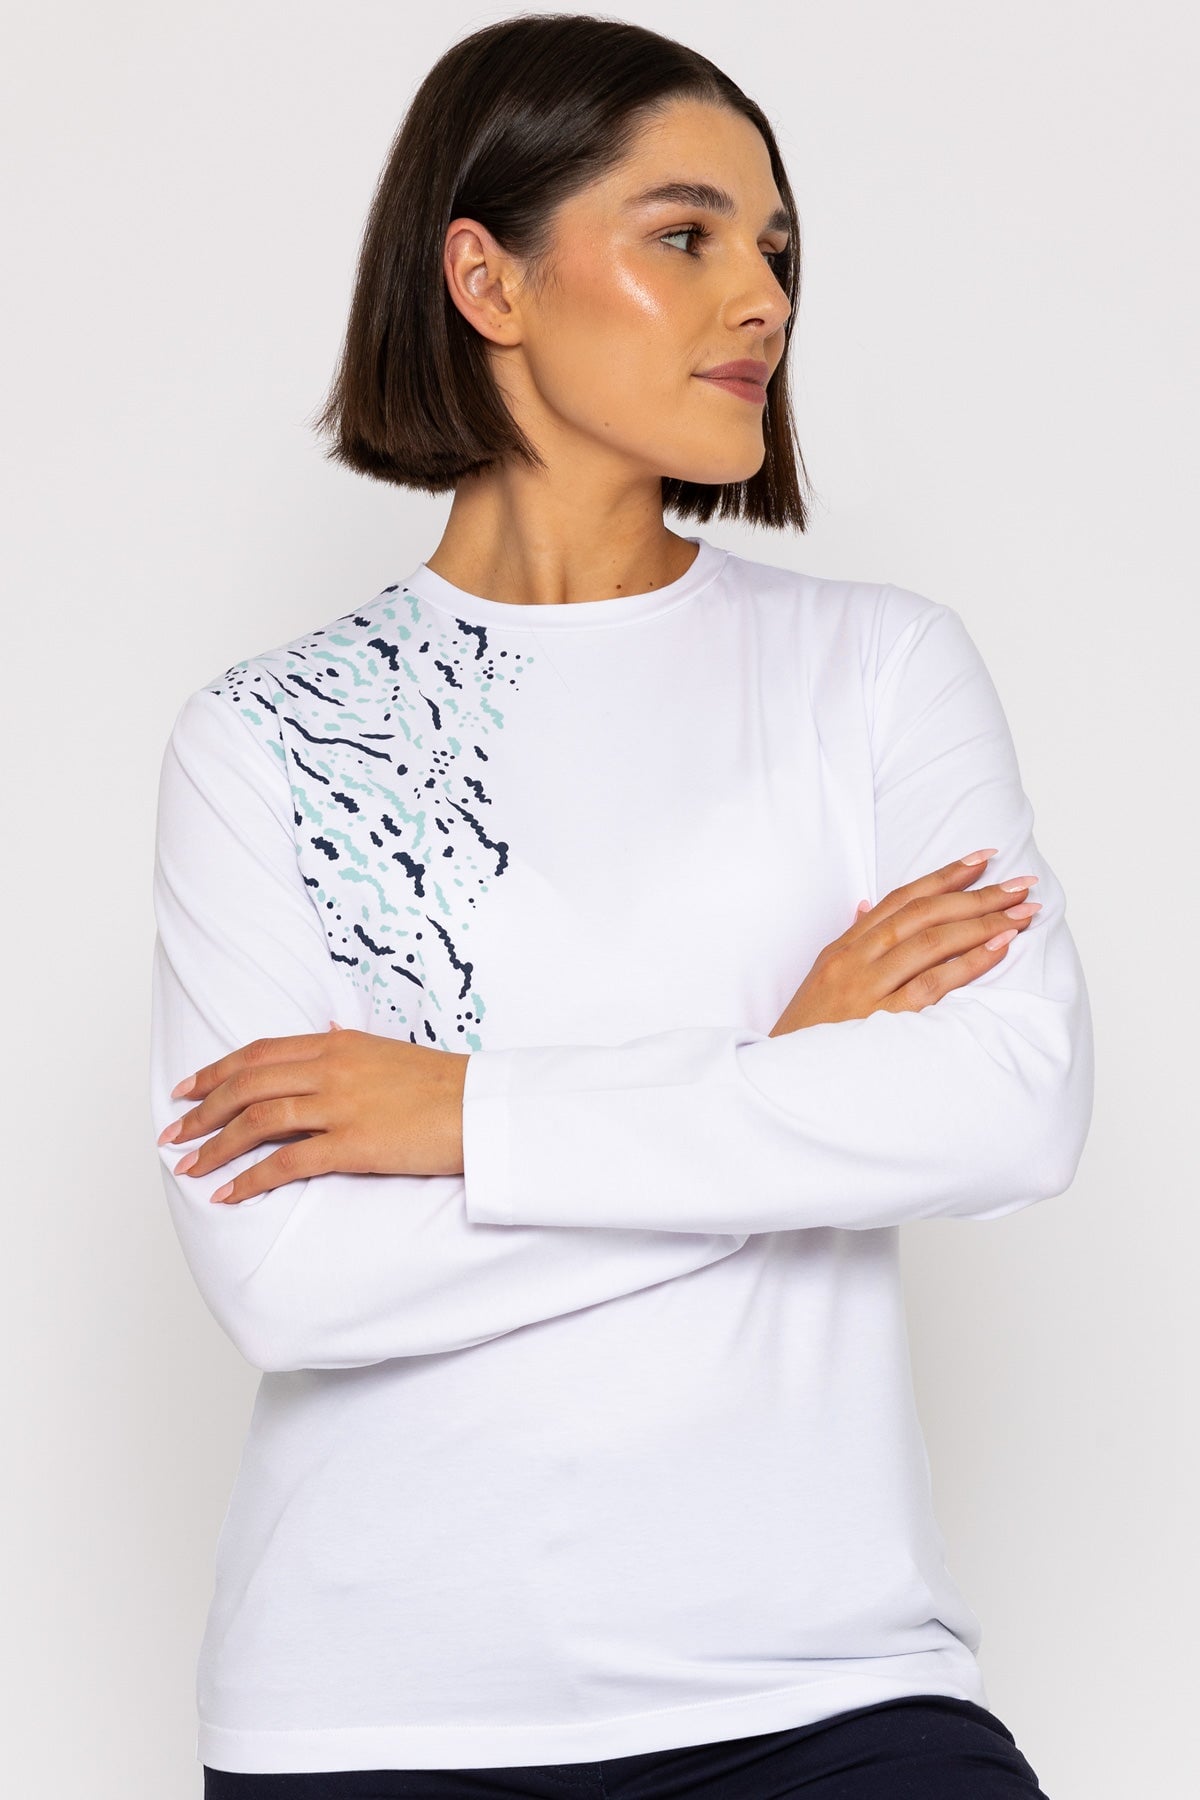 Long Sleeve Jersey Top in White | Tops | Carraig Donn